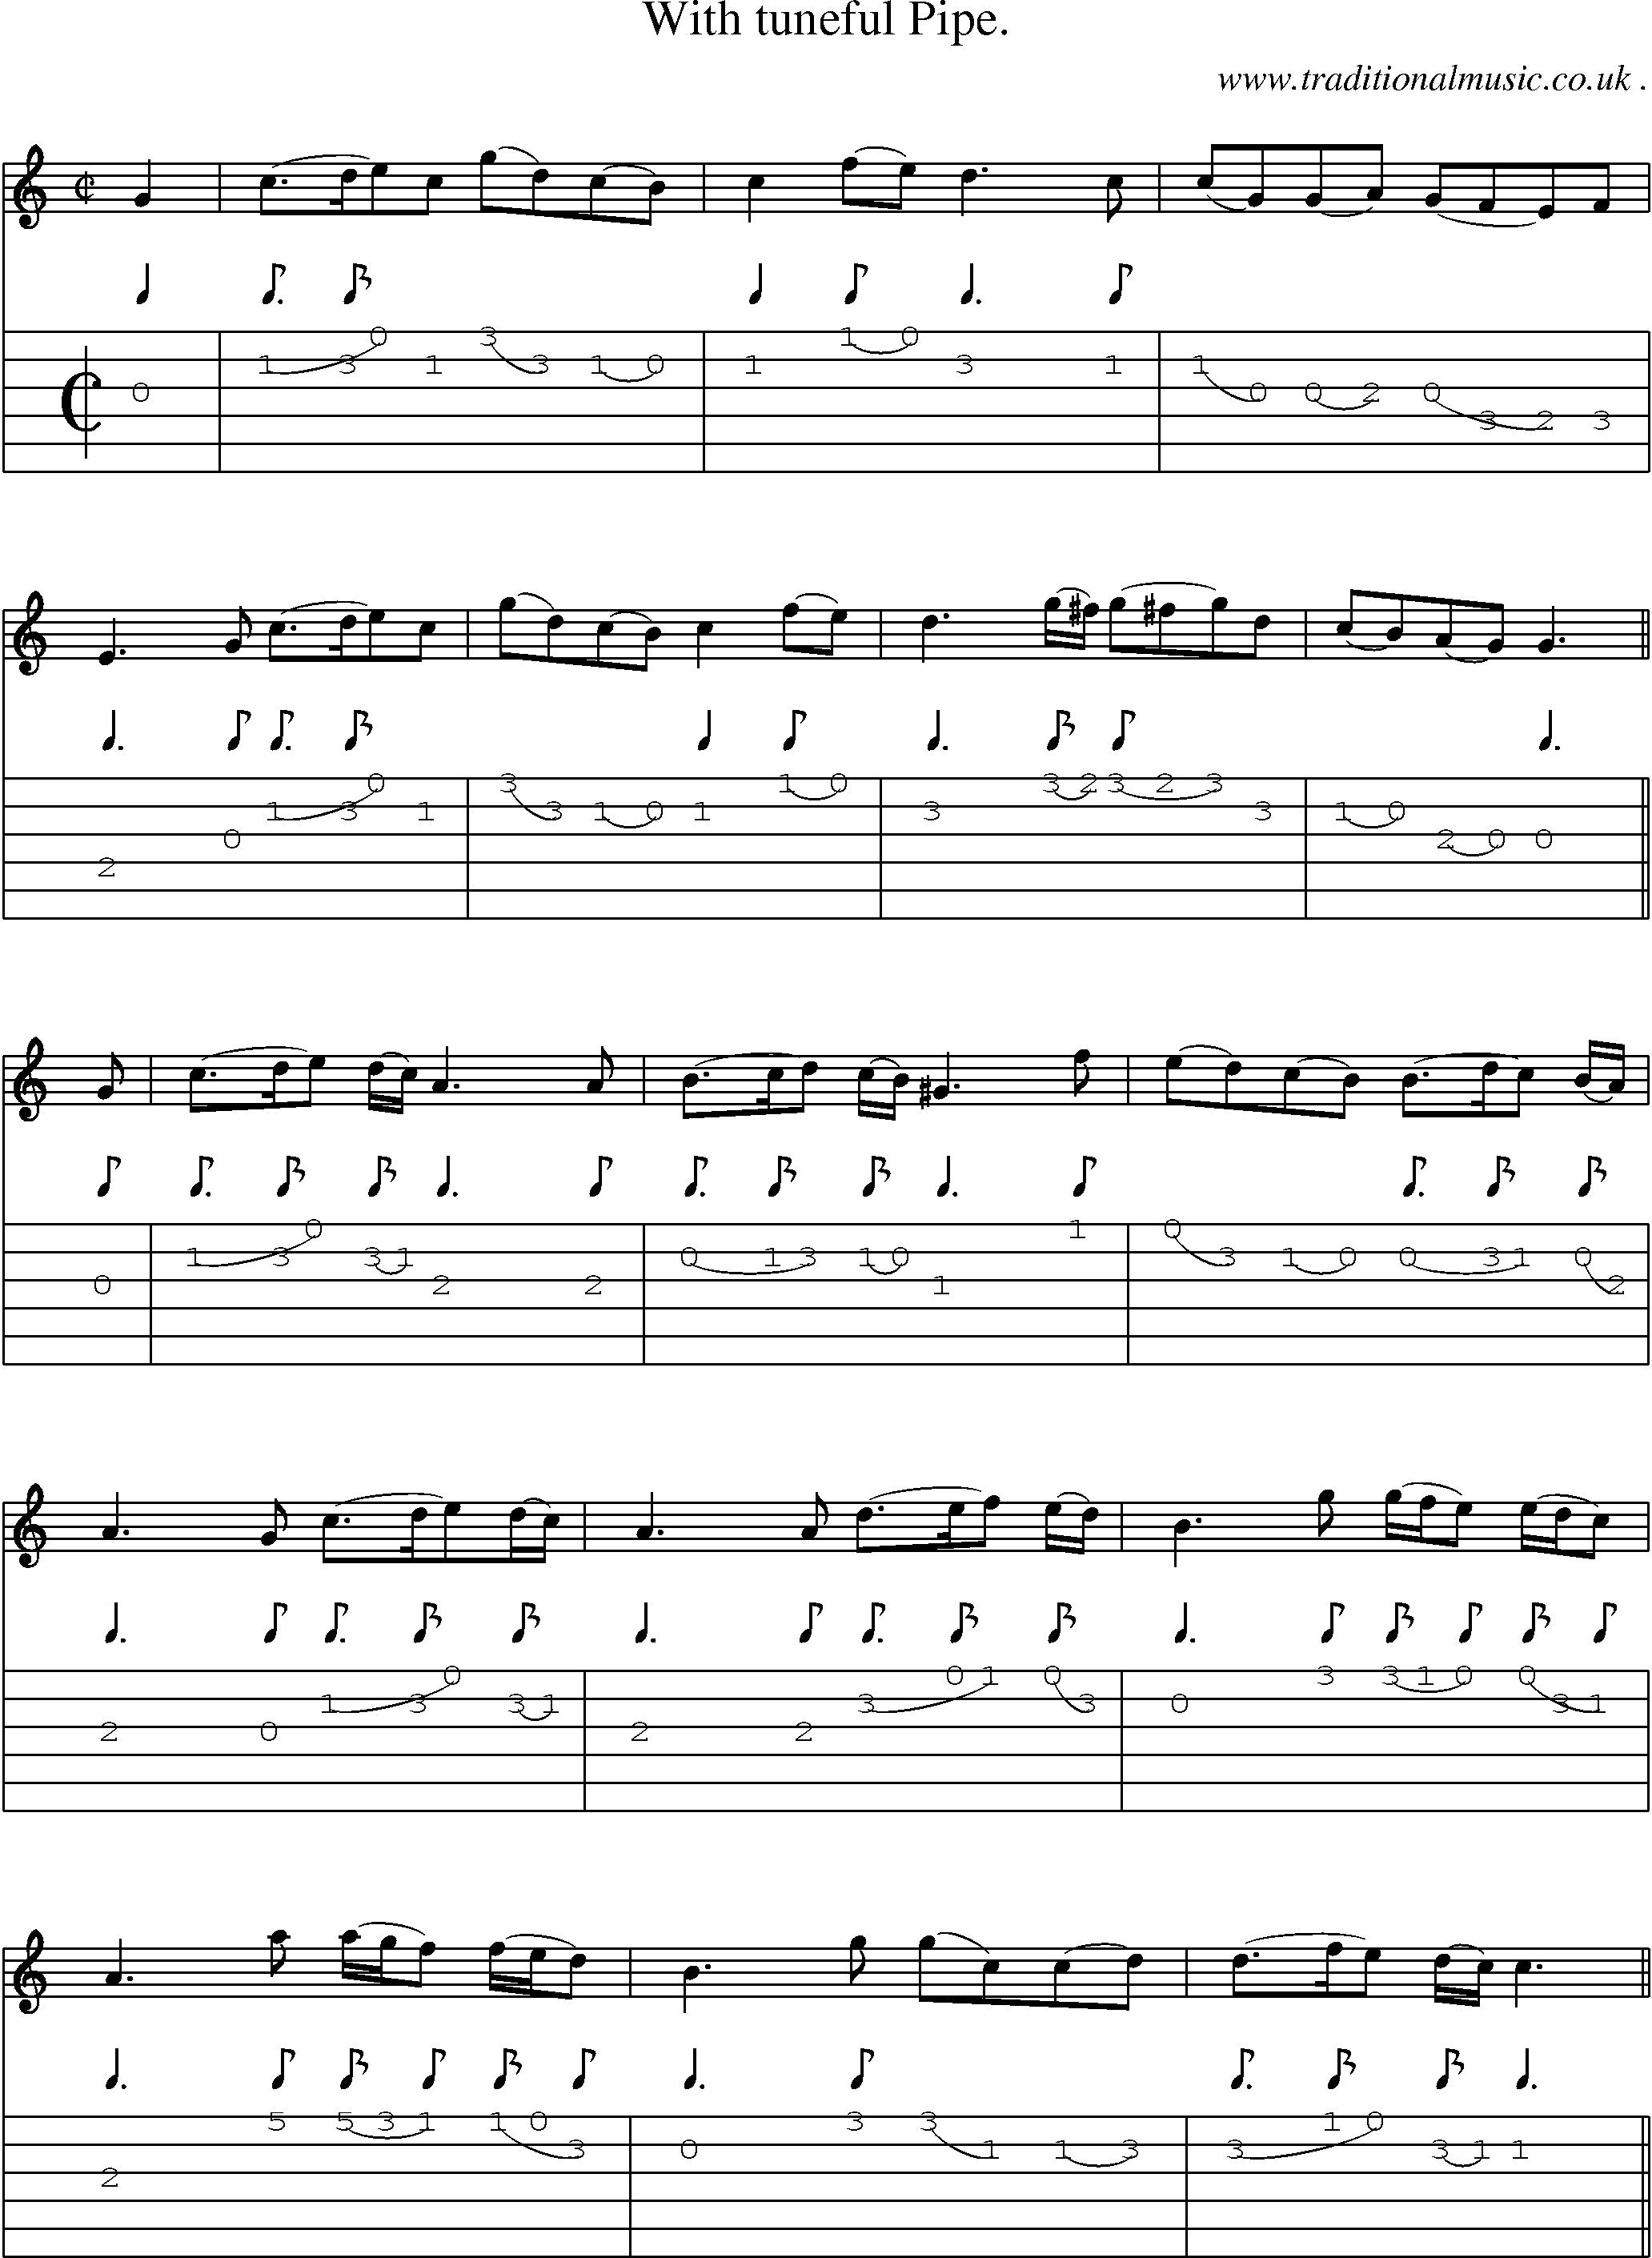 Sheet-Music and Guitar Tabs for With Tuneful Pipe